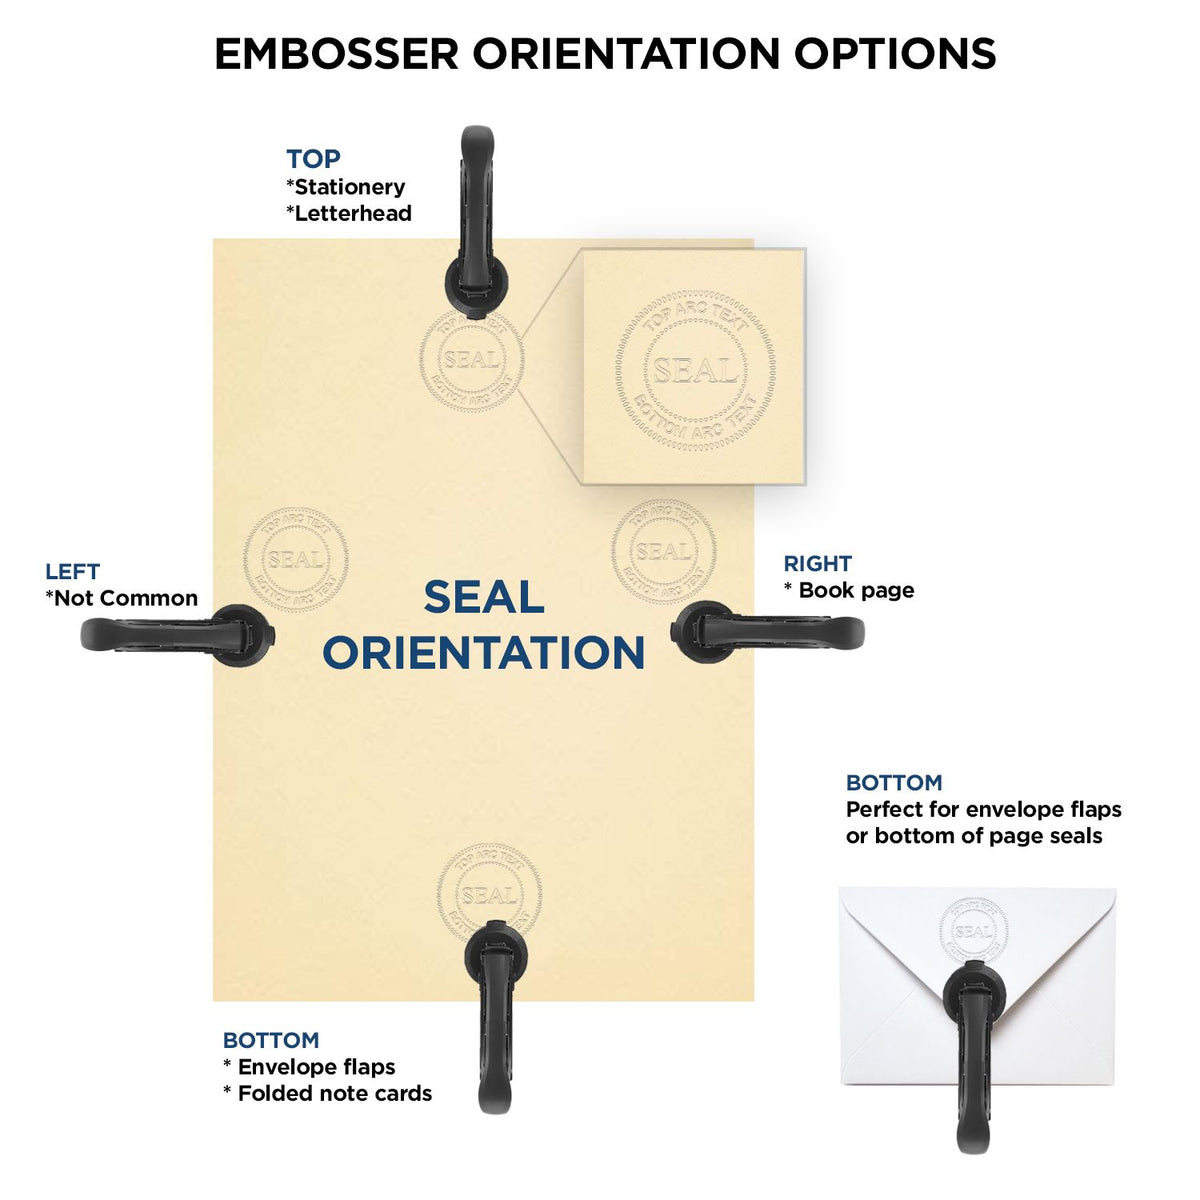 An infographic for the State of New Mexico Extended Long Reach Engineer Seal showing embosser orientation, this is showing examples of a top, bottom, right and left insert.